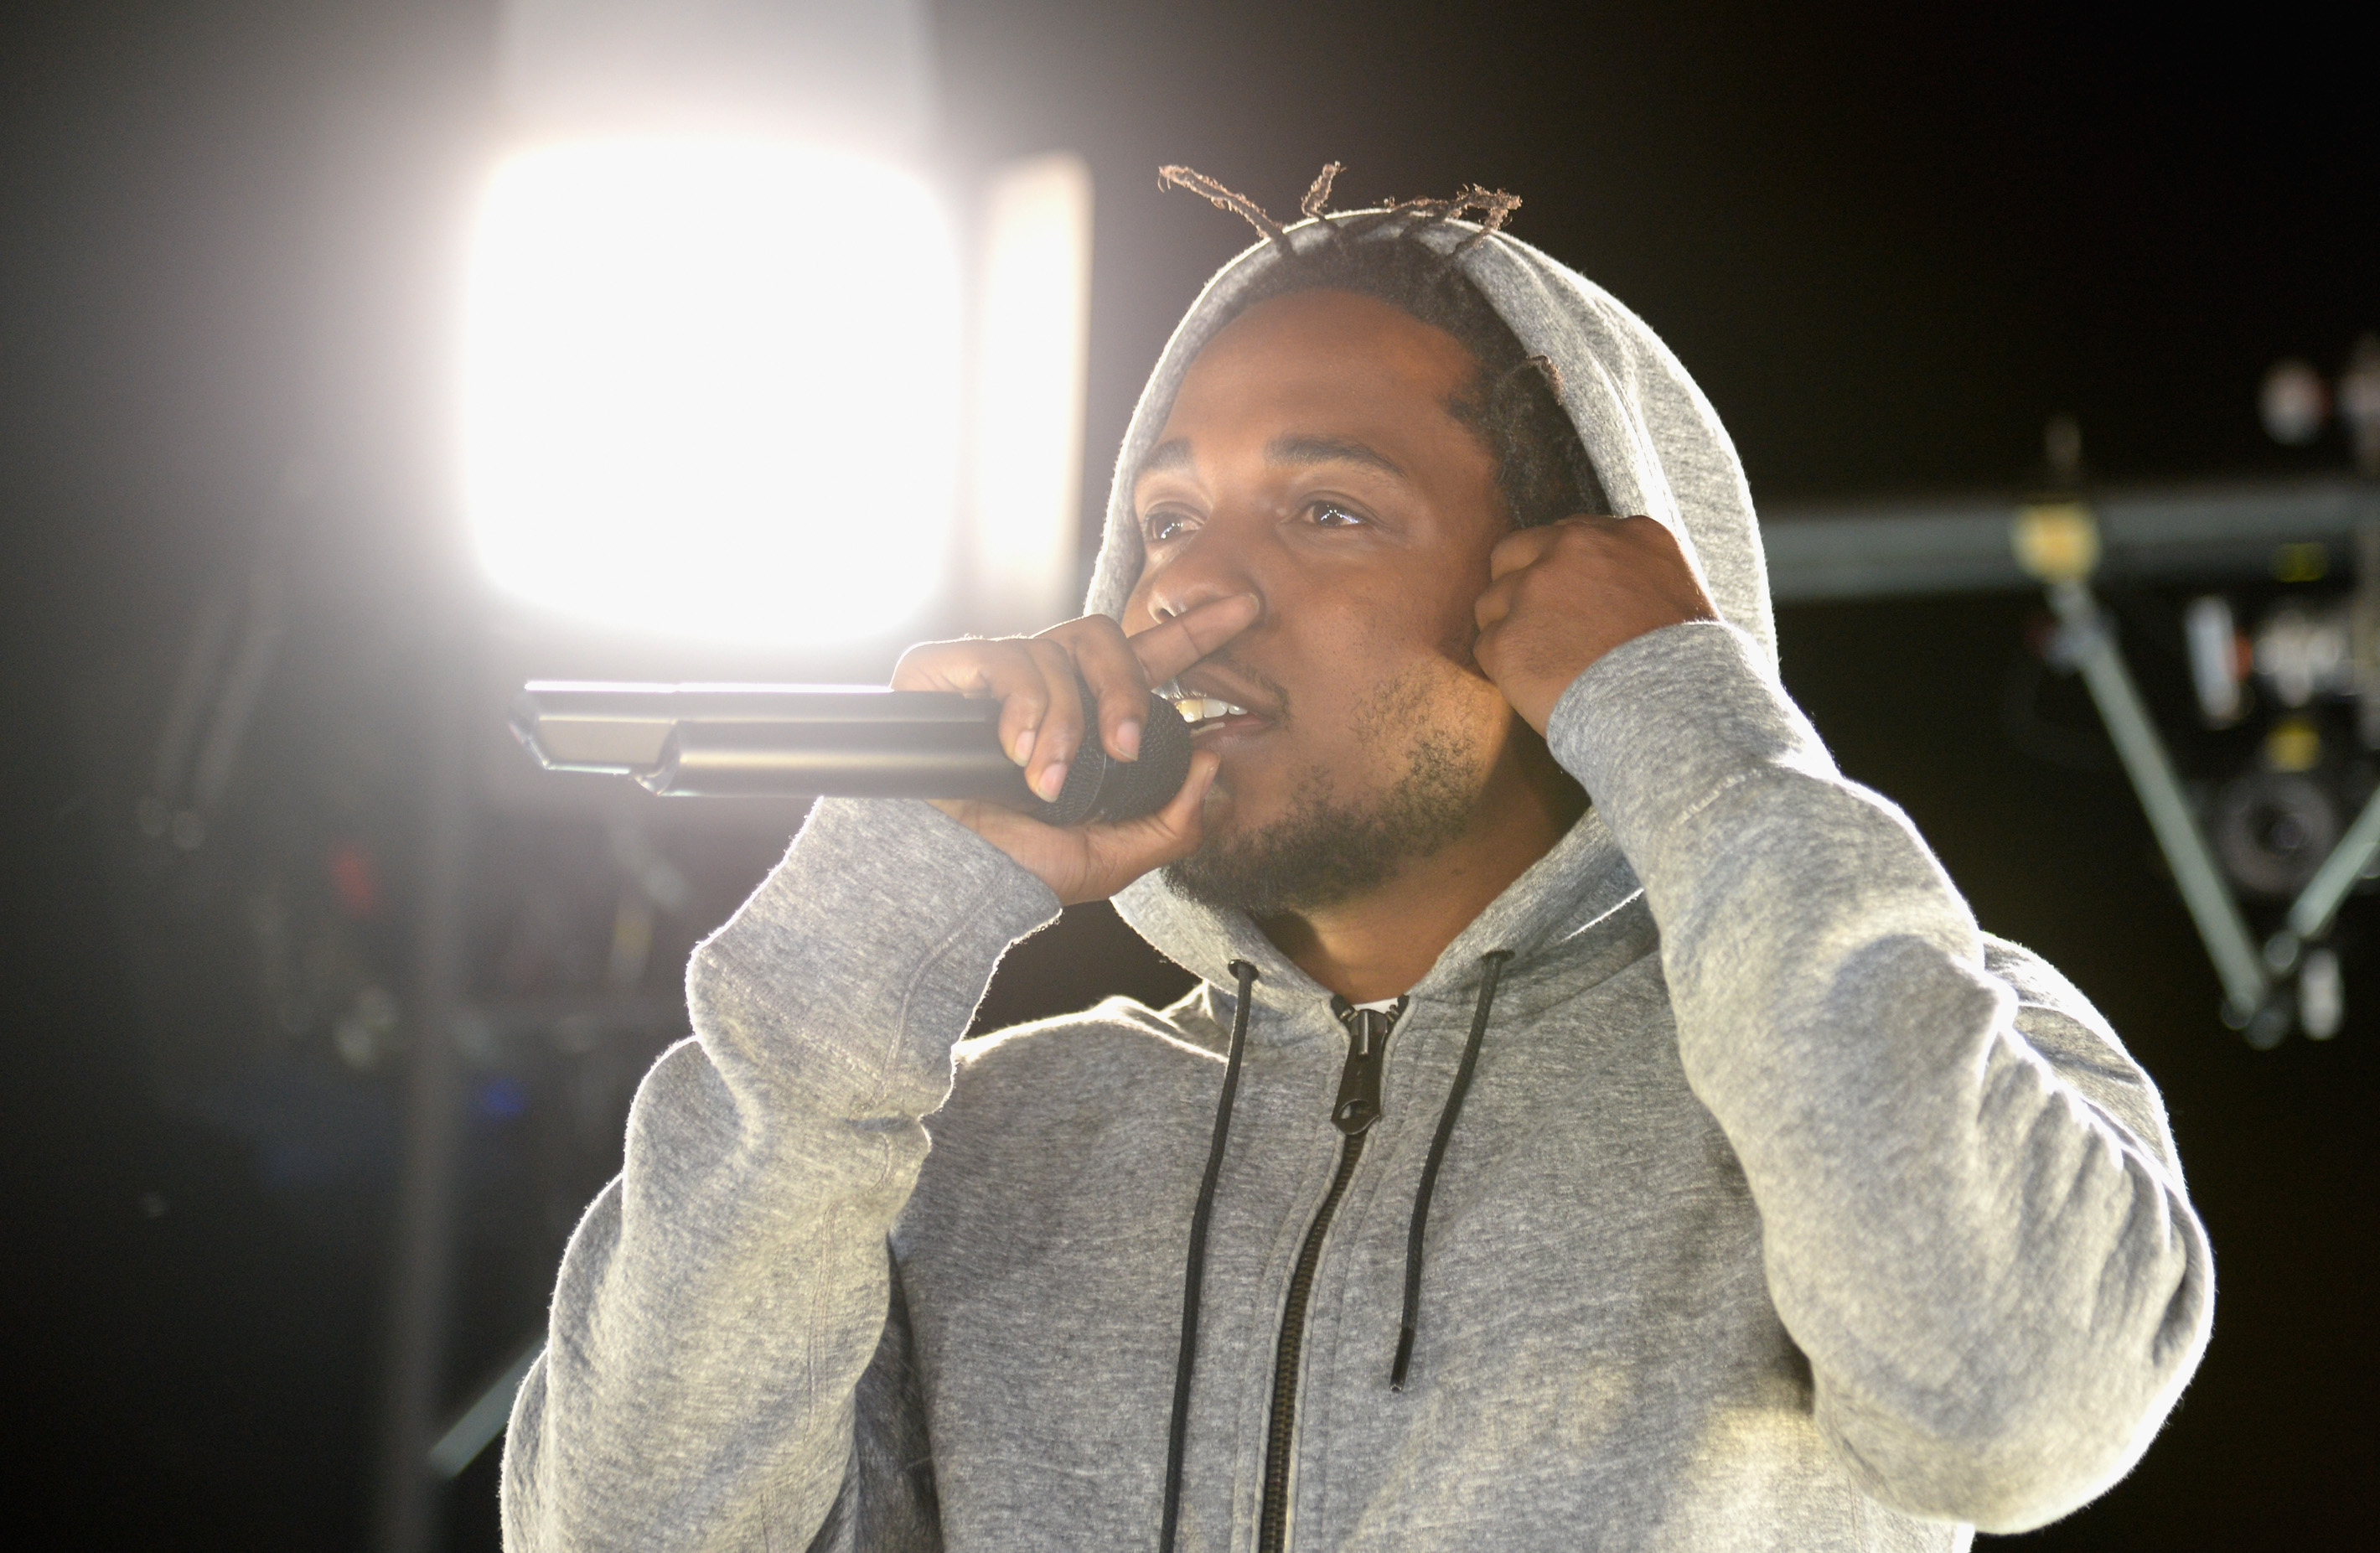 Kendrick Lamar performs at #GETPUMPED live event. Reebok And Kendrick Lamar Take Over The Streets Of Hollywood, Fusing Fitness And Music With A Ground-Breaking Event on March 24, 2015 in West Hollywood, California. (Chris Weeks&mdash;Getty Images for Reebok)